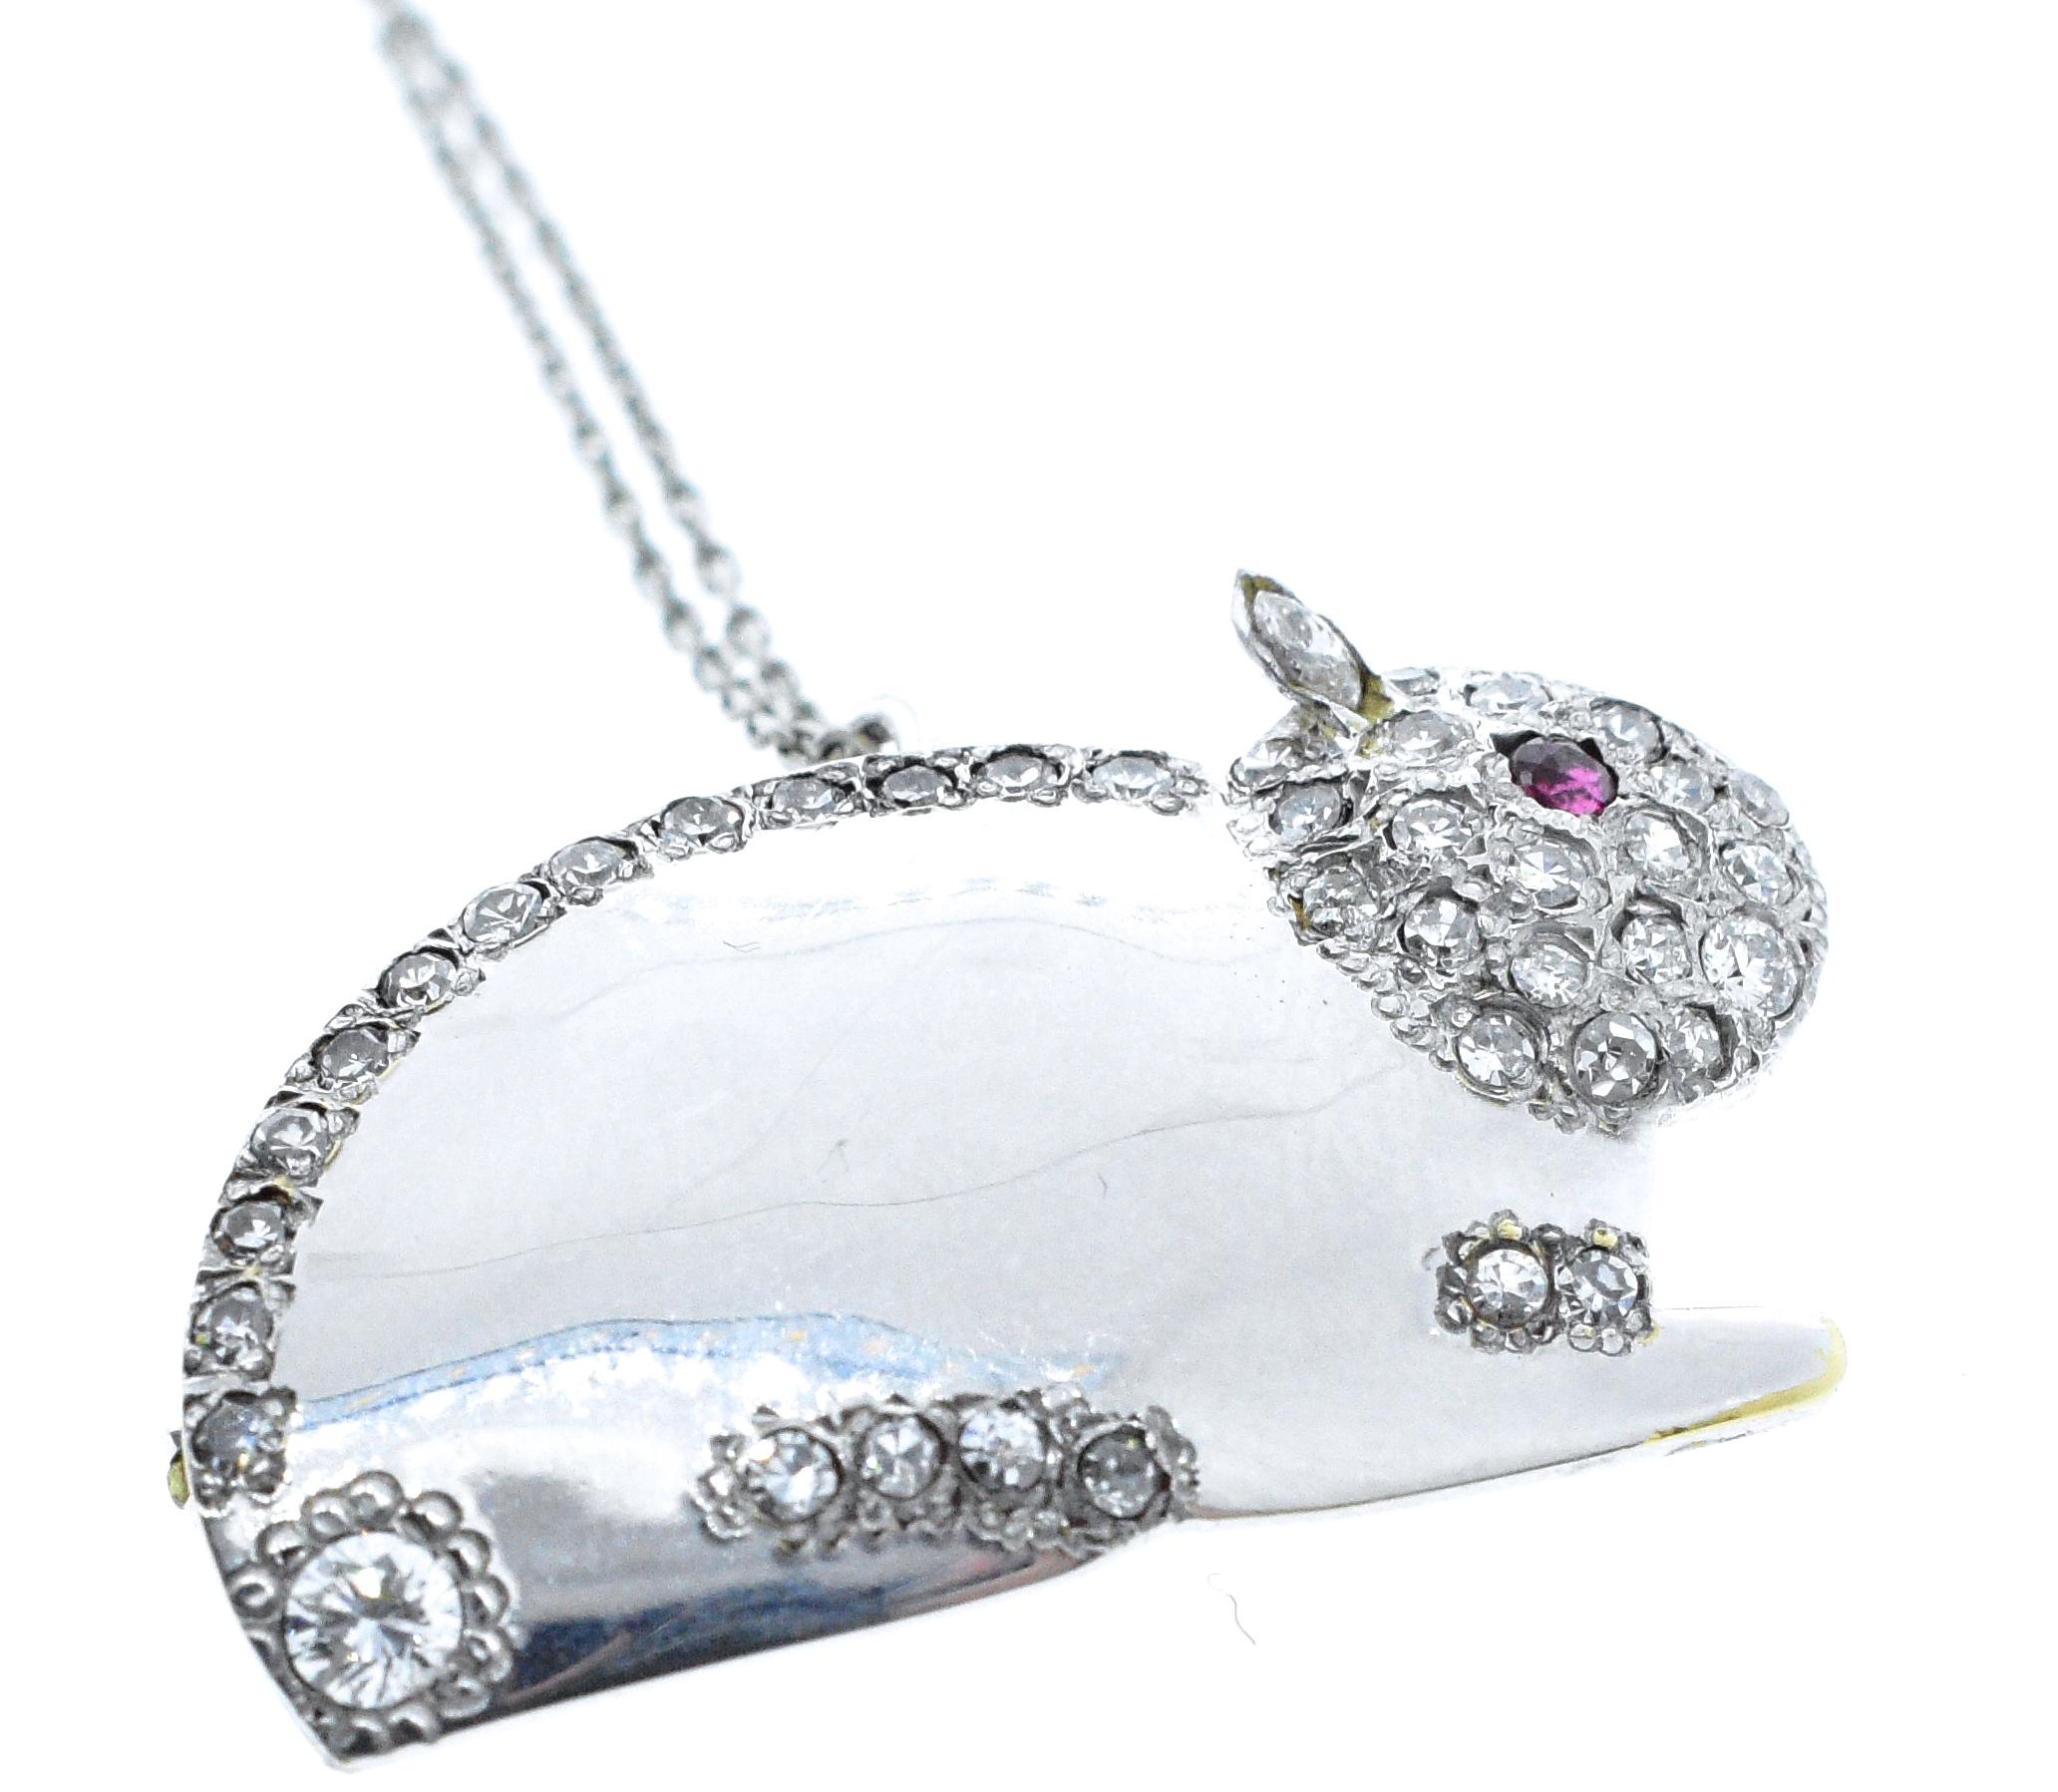 Diamonds set in 18K white gold in the motif of a bunny with a natural ruby eye. He has 40 white brilliant cut diamonds throughout his body with a total diamond weight of .75 cts. In fine condition, he is 1.5 inches in length and can be worn as a